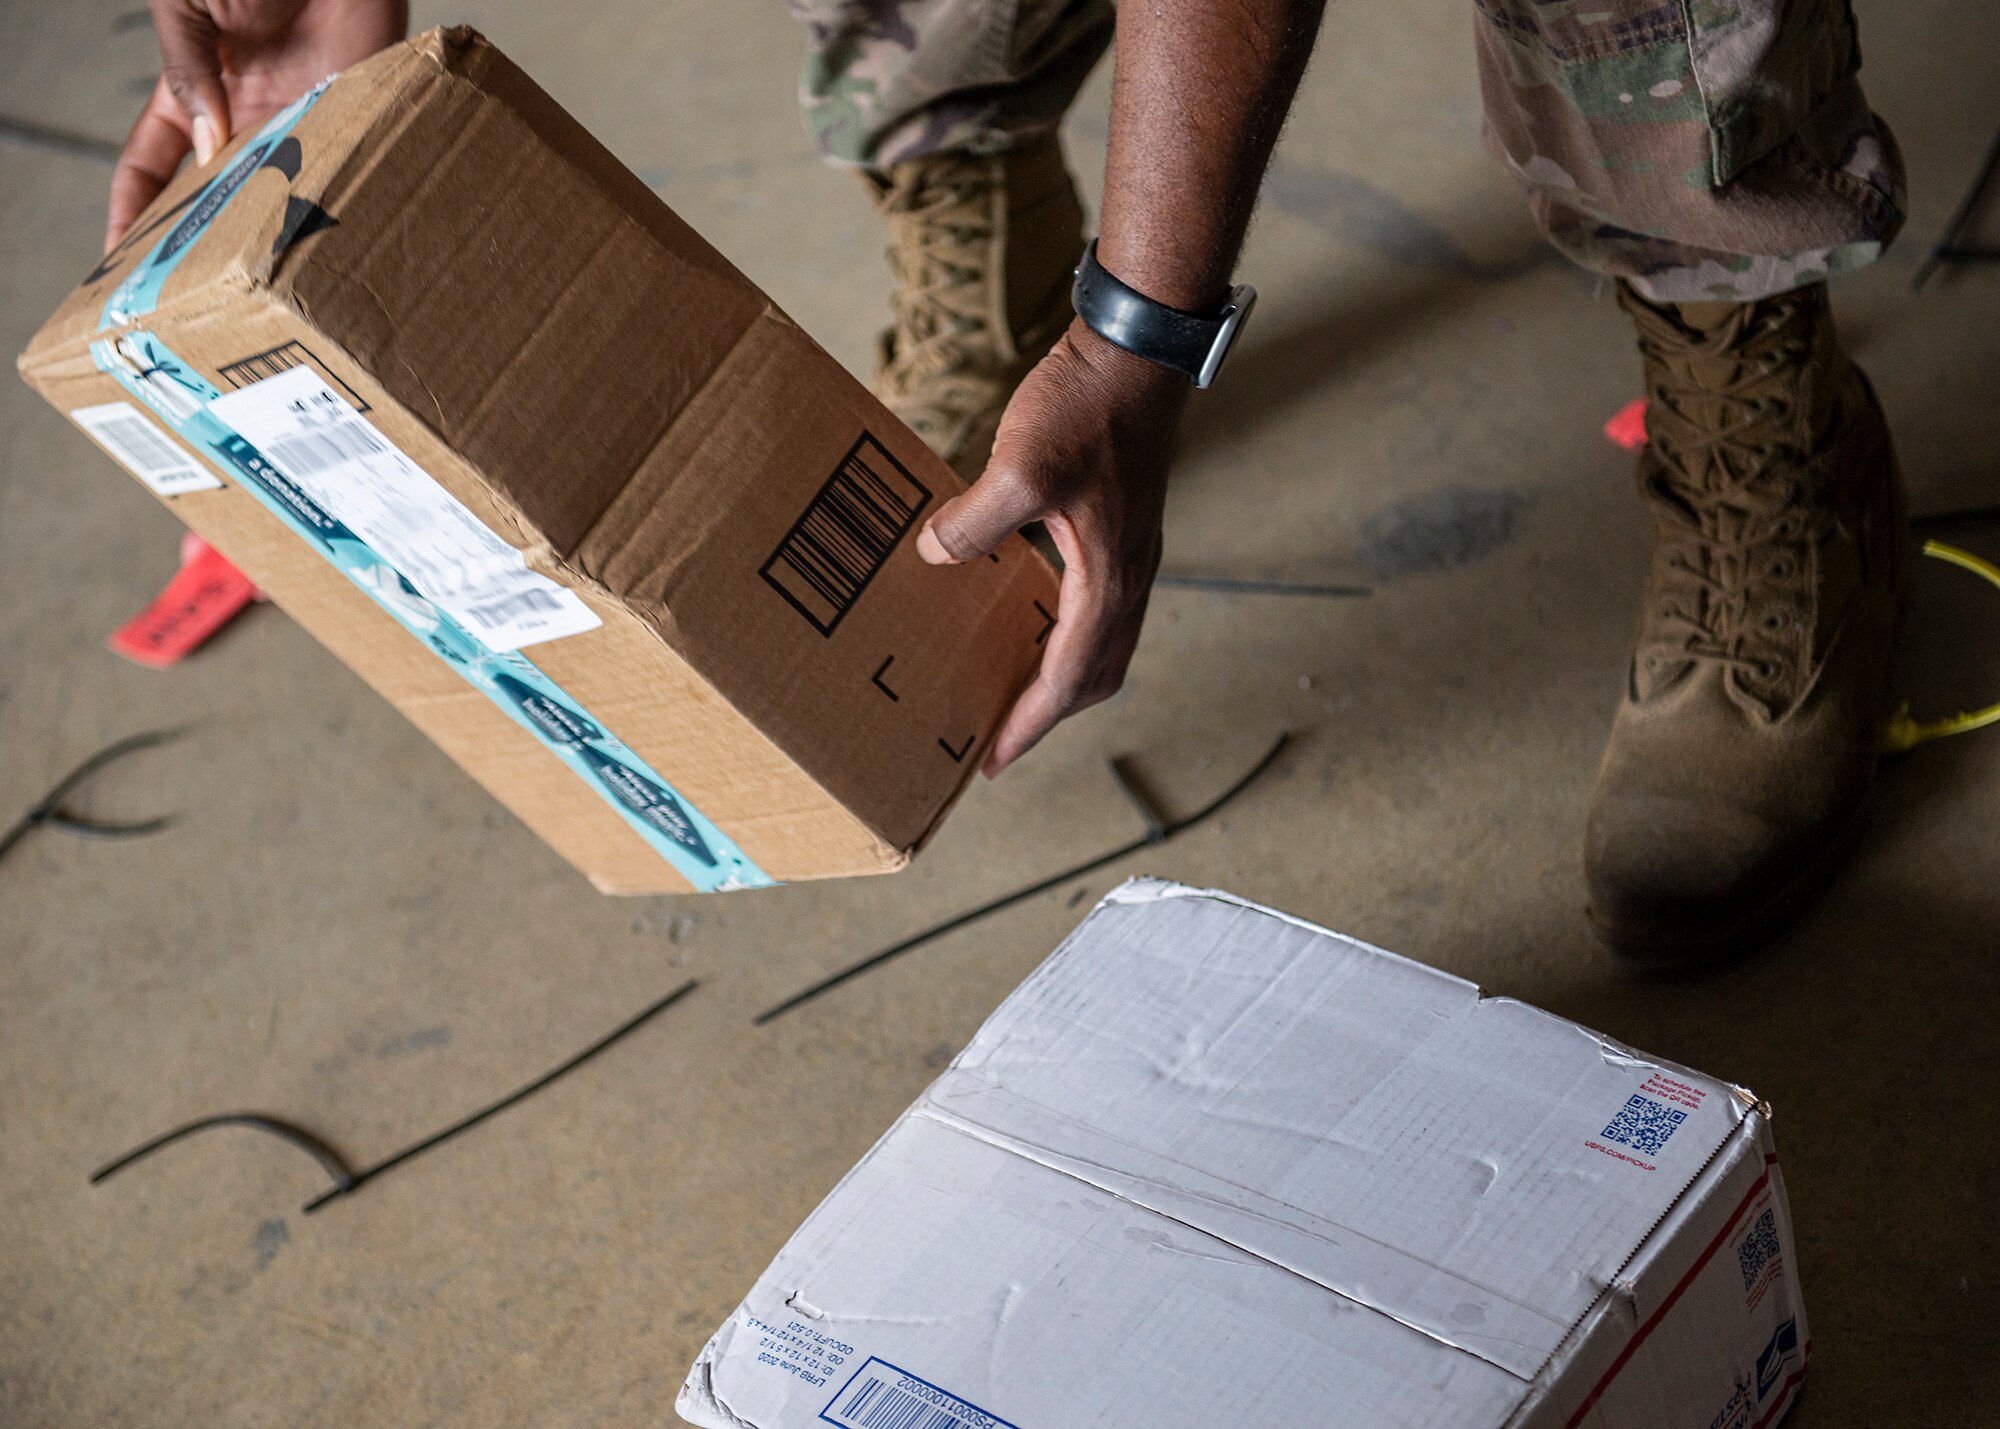 A U.S. Airman assigned to the 380th Expeditionary Force Support Squadron picks up a package at Al Dhafra Air Base (ADAB), United Arab Emirates, Dec. 8, 2020. Since October 2020, the ADAB post office has processed approximately 10,000 letters and packages weighing up to 126,000 pounds of mail. (U.S. Air Force photo by Senior Airman Bryan Guthrie)